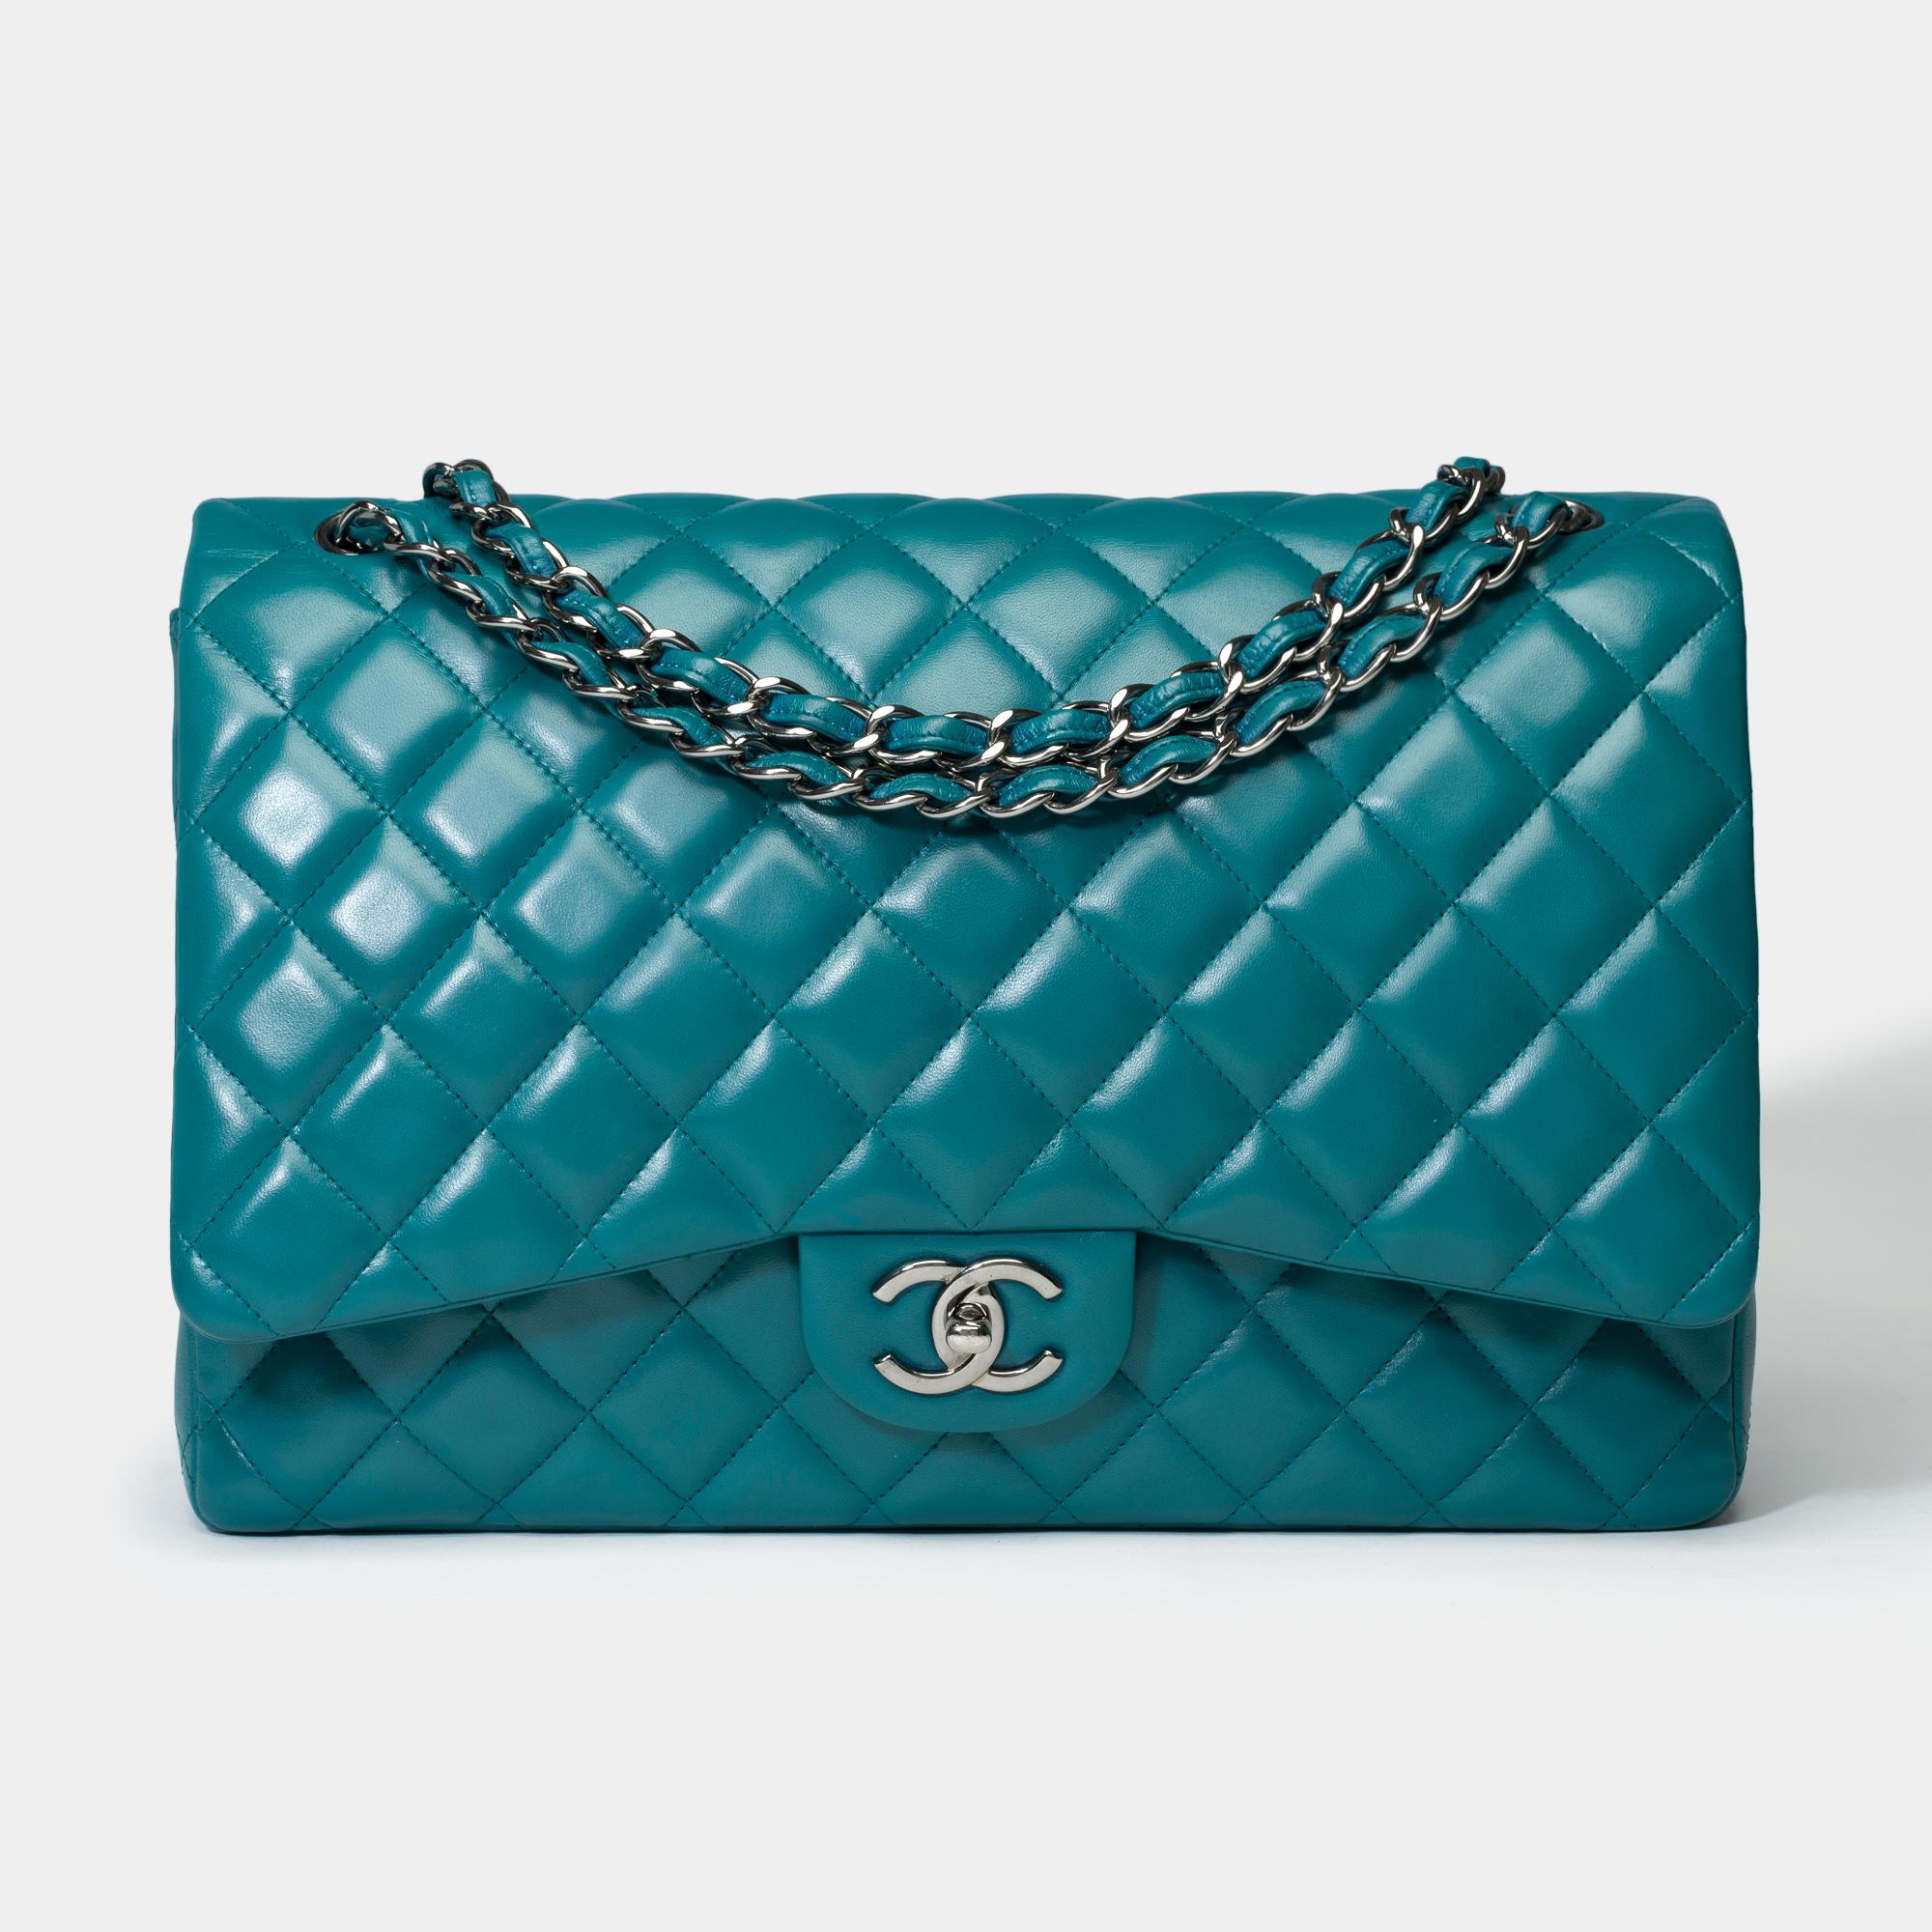 Stunning​ ​&​ ​Majestic​ ​Chanel​ ​Timeless​ ​Maxi​ ​Jumbo​ ​double​ ​flap​ ​shoulder​ ​bag​ ​in​ ​duck​ ​blue​ ​quilted​ ​lambskin​ ​leather,​ ​silver​ ​metal​ ​trim,​ ​a​ ​silver​ ​metal​ ​chain​ ​handle​ ​interlaced​ ​with​ ​blue​ ​leather​ ​for​